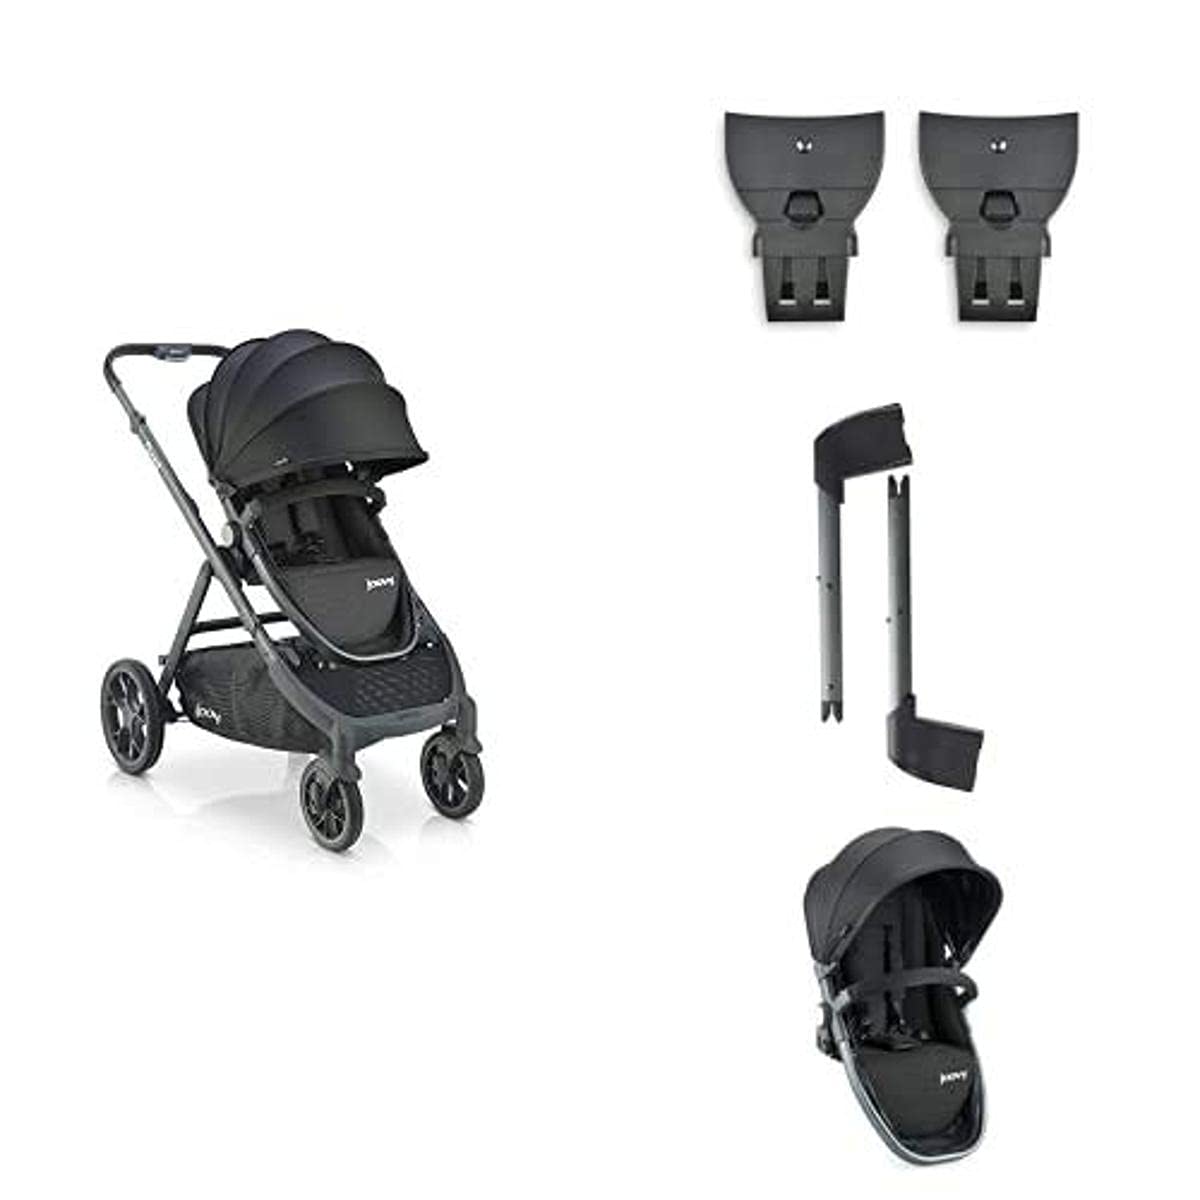 Joovy Qool Double Stroller with 2 Britax/BOB B-Safe Car Seat Adapters + Qool Front Adapters + Second Seat, Twin Travel System, Black Melange